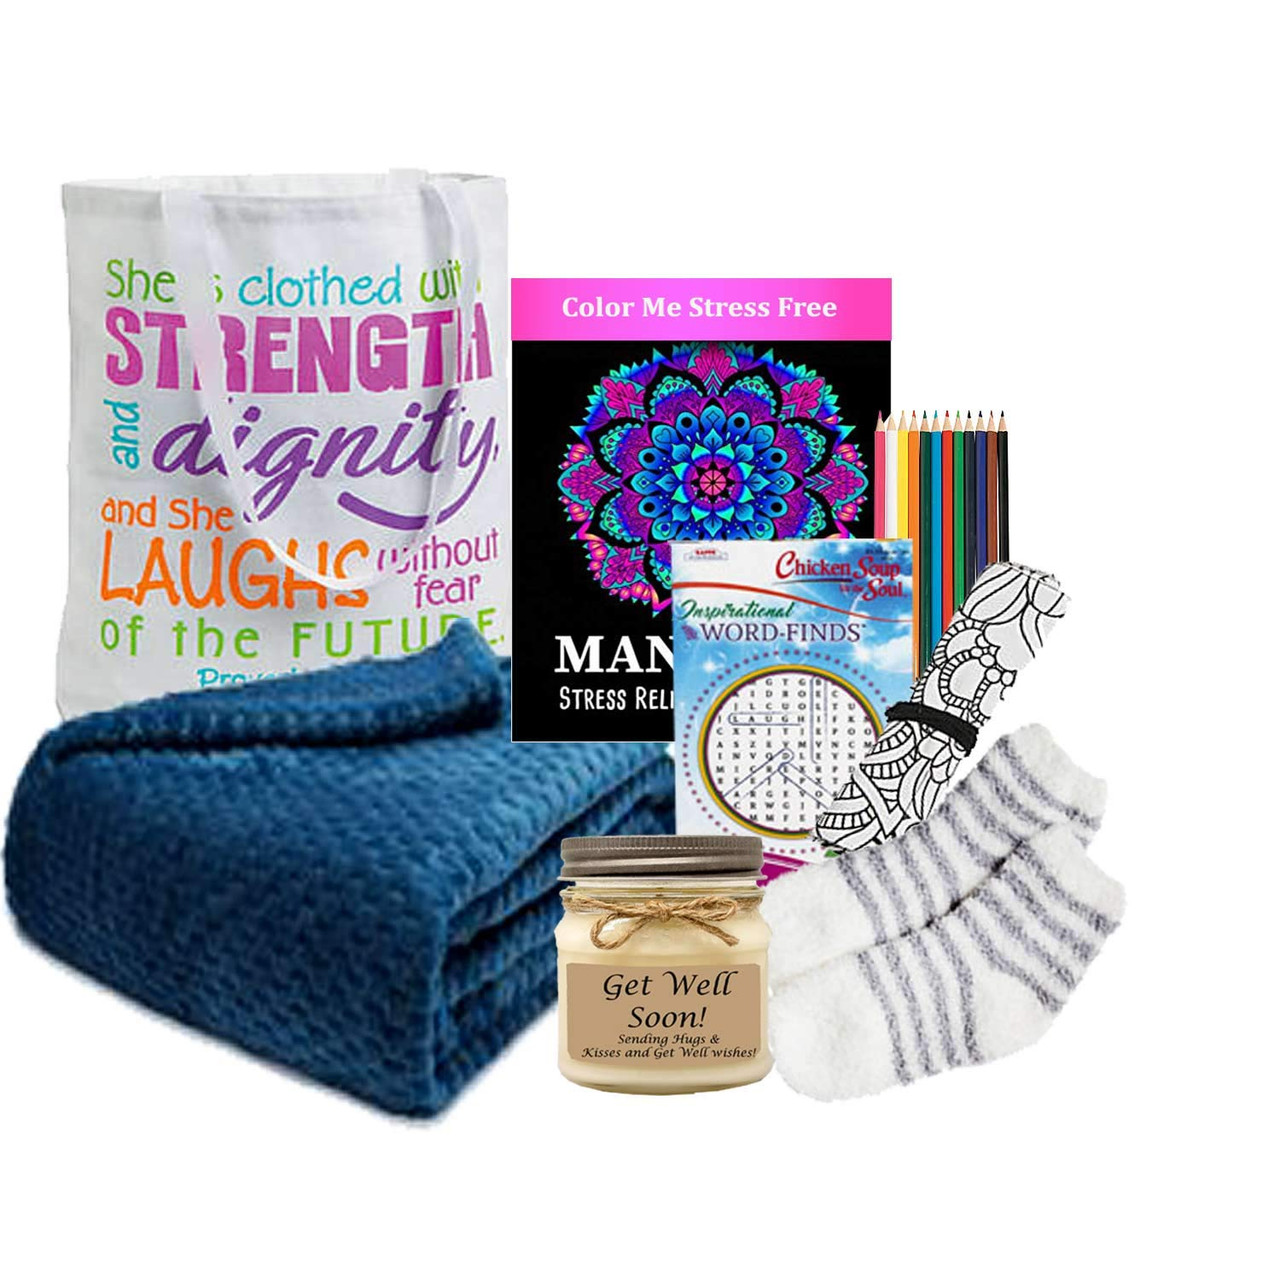 Sleep, Rest and Recover Get Well Gifts for Women - Get Well Gift -  Baskets-n-Beyond